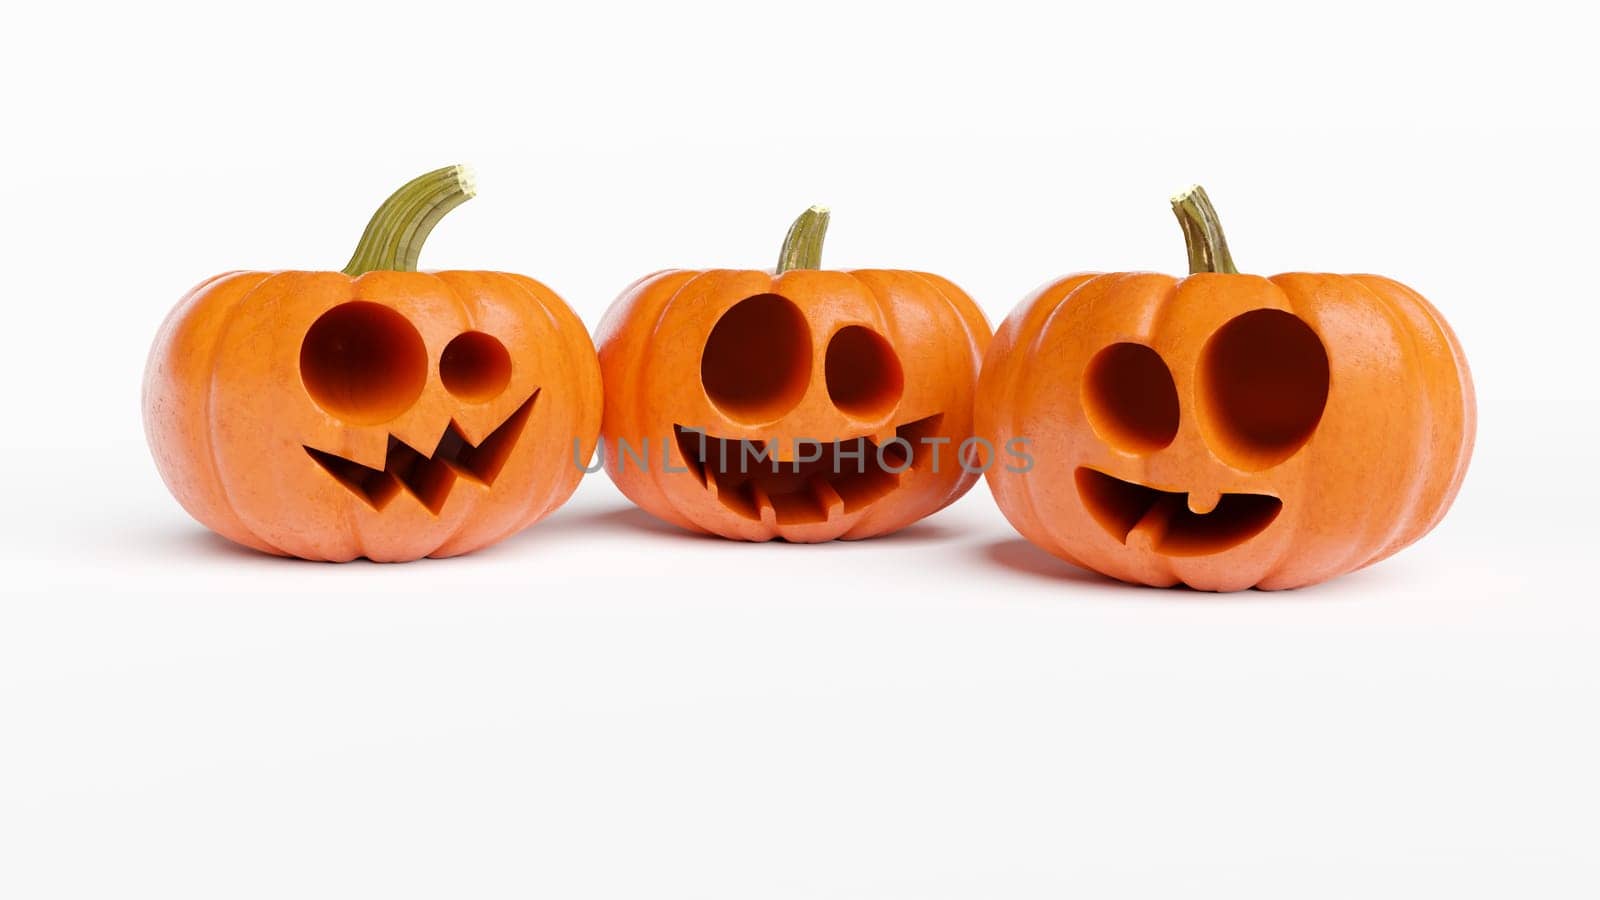 Funny Halloween Pumpkins on white background by macroarting